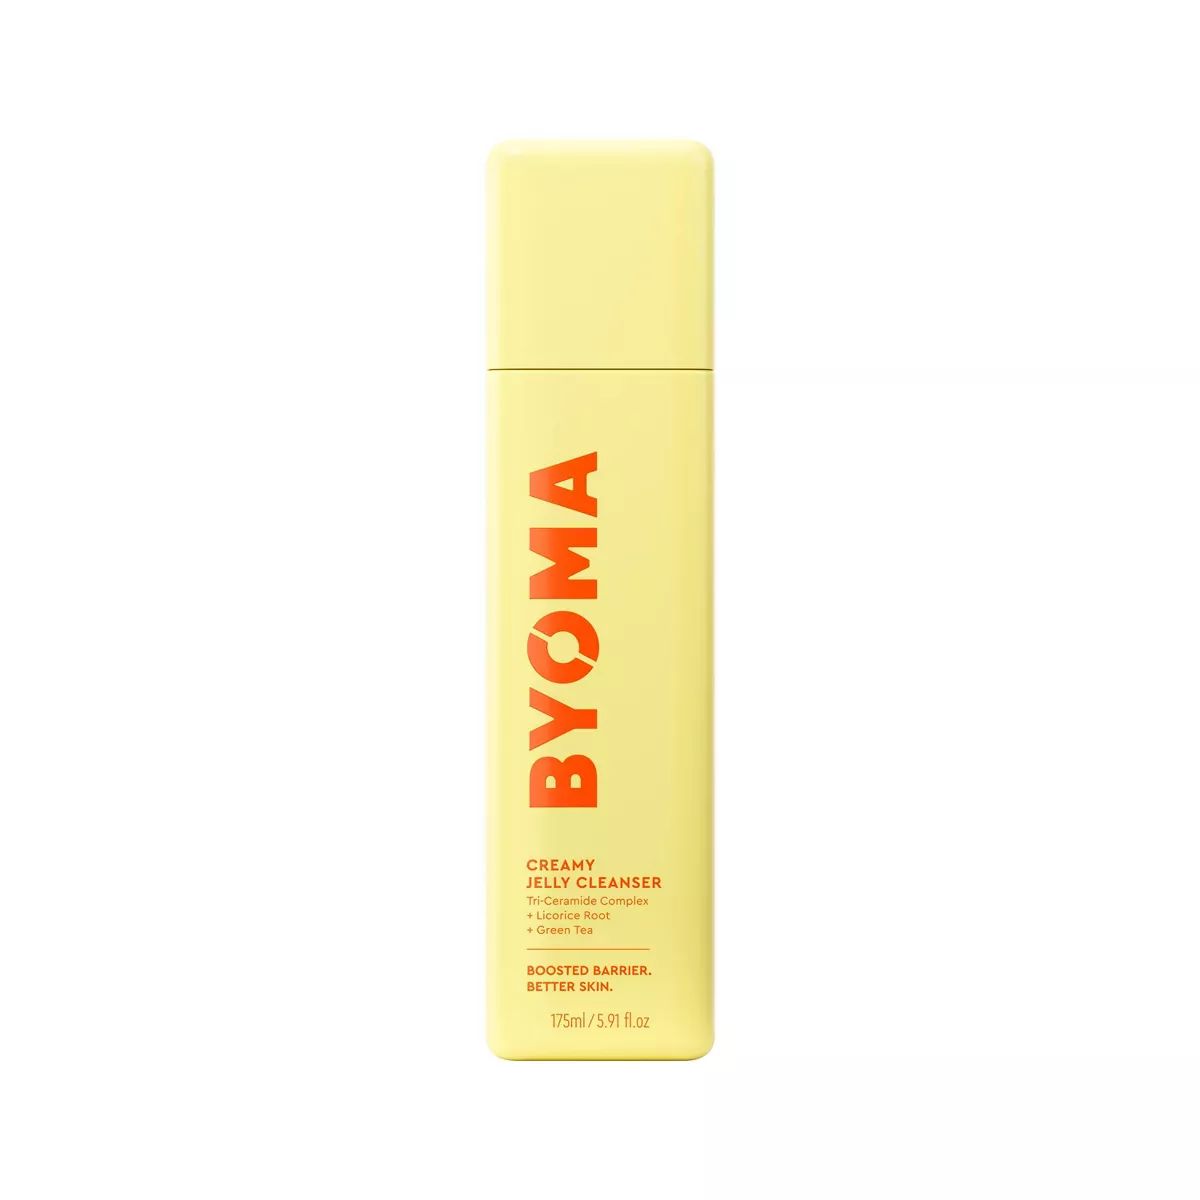 BYOMA Creamy Jelly Face Cleanser - Unscented - 5.91 fl oz | Target